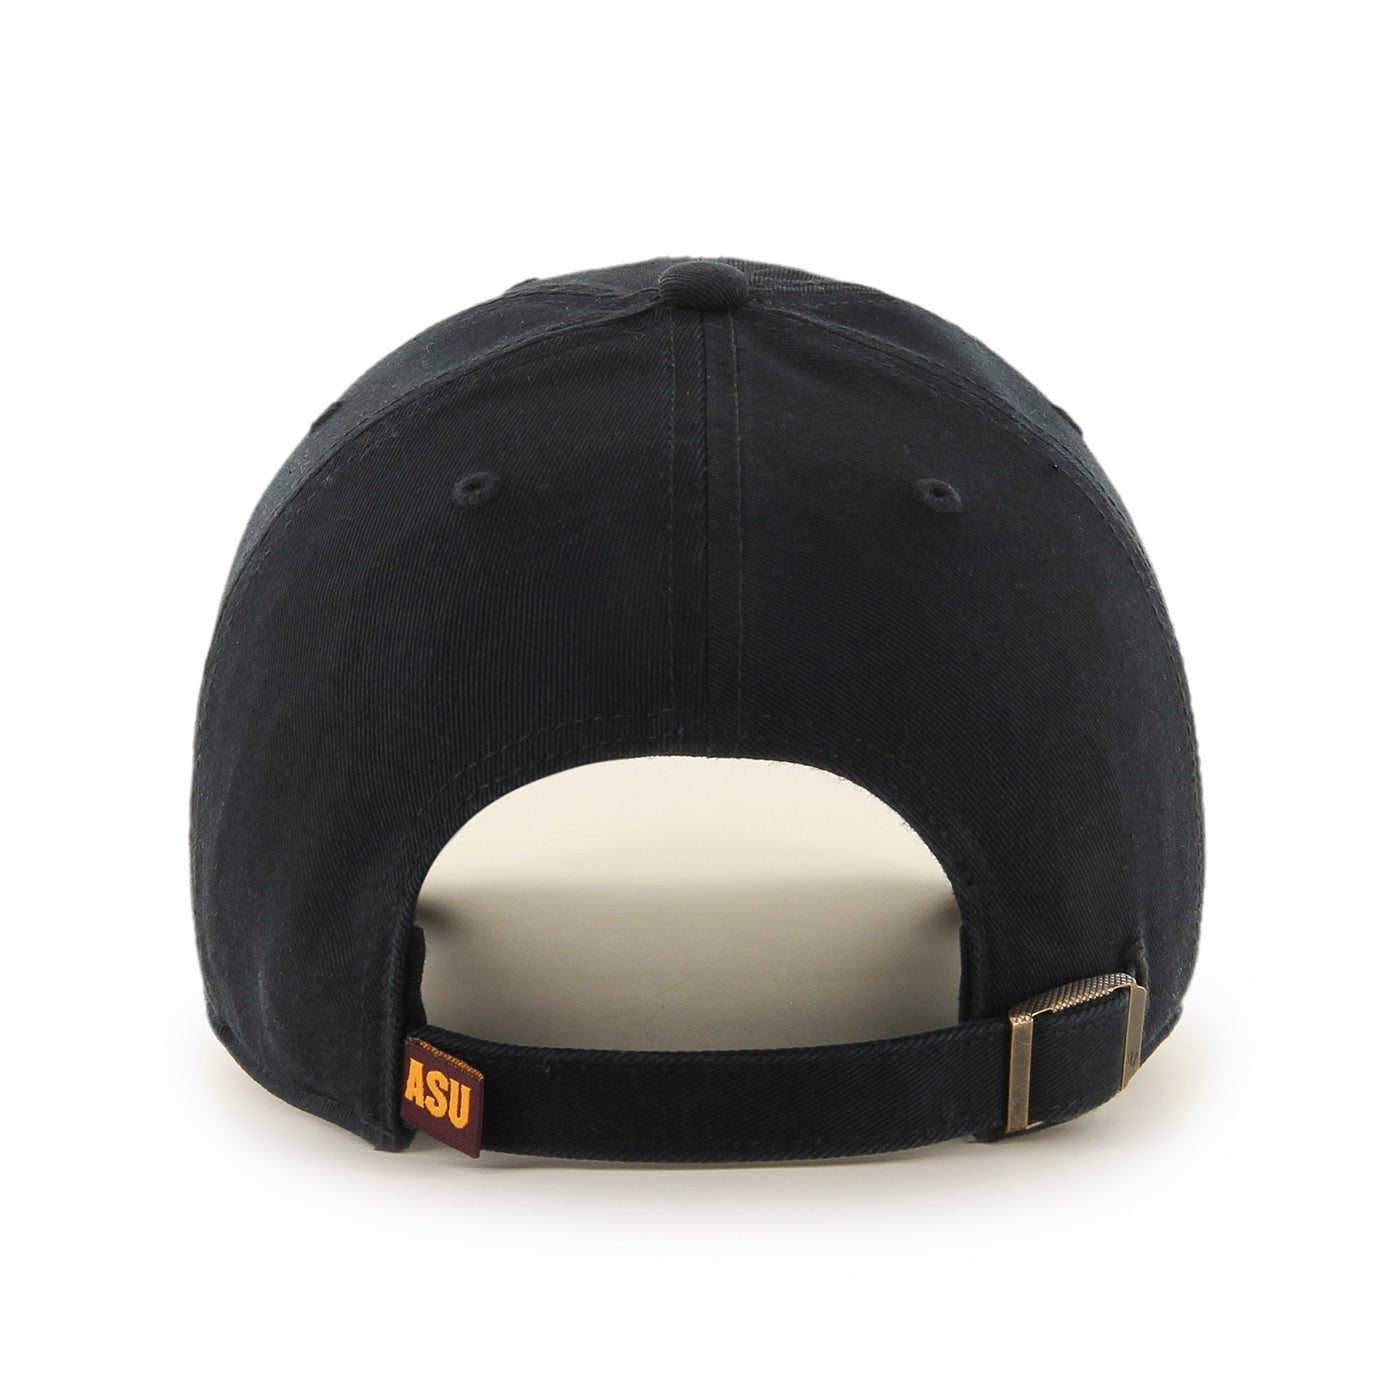 Back view of black adjustable hat with maroon tag on strap saying 'ASU'